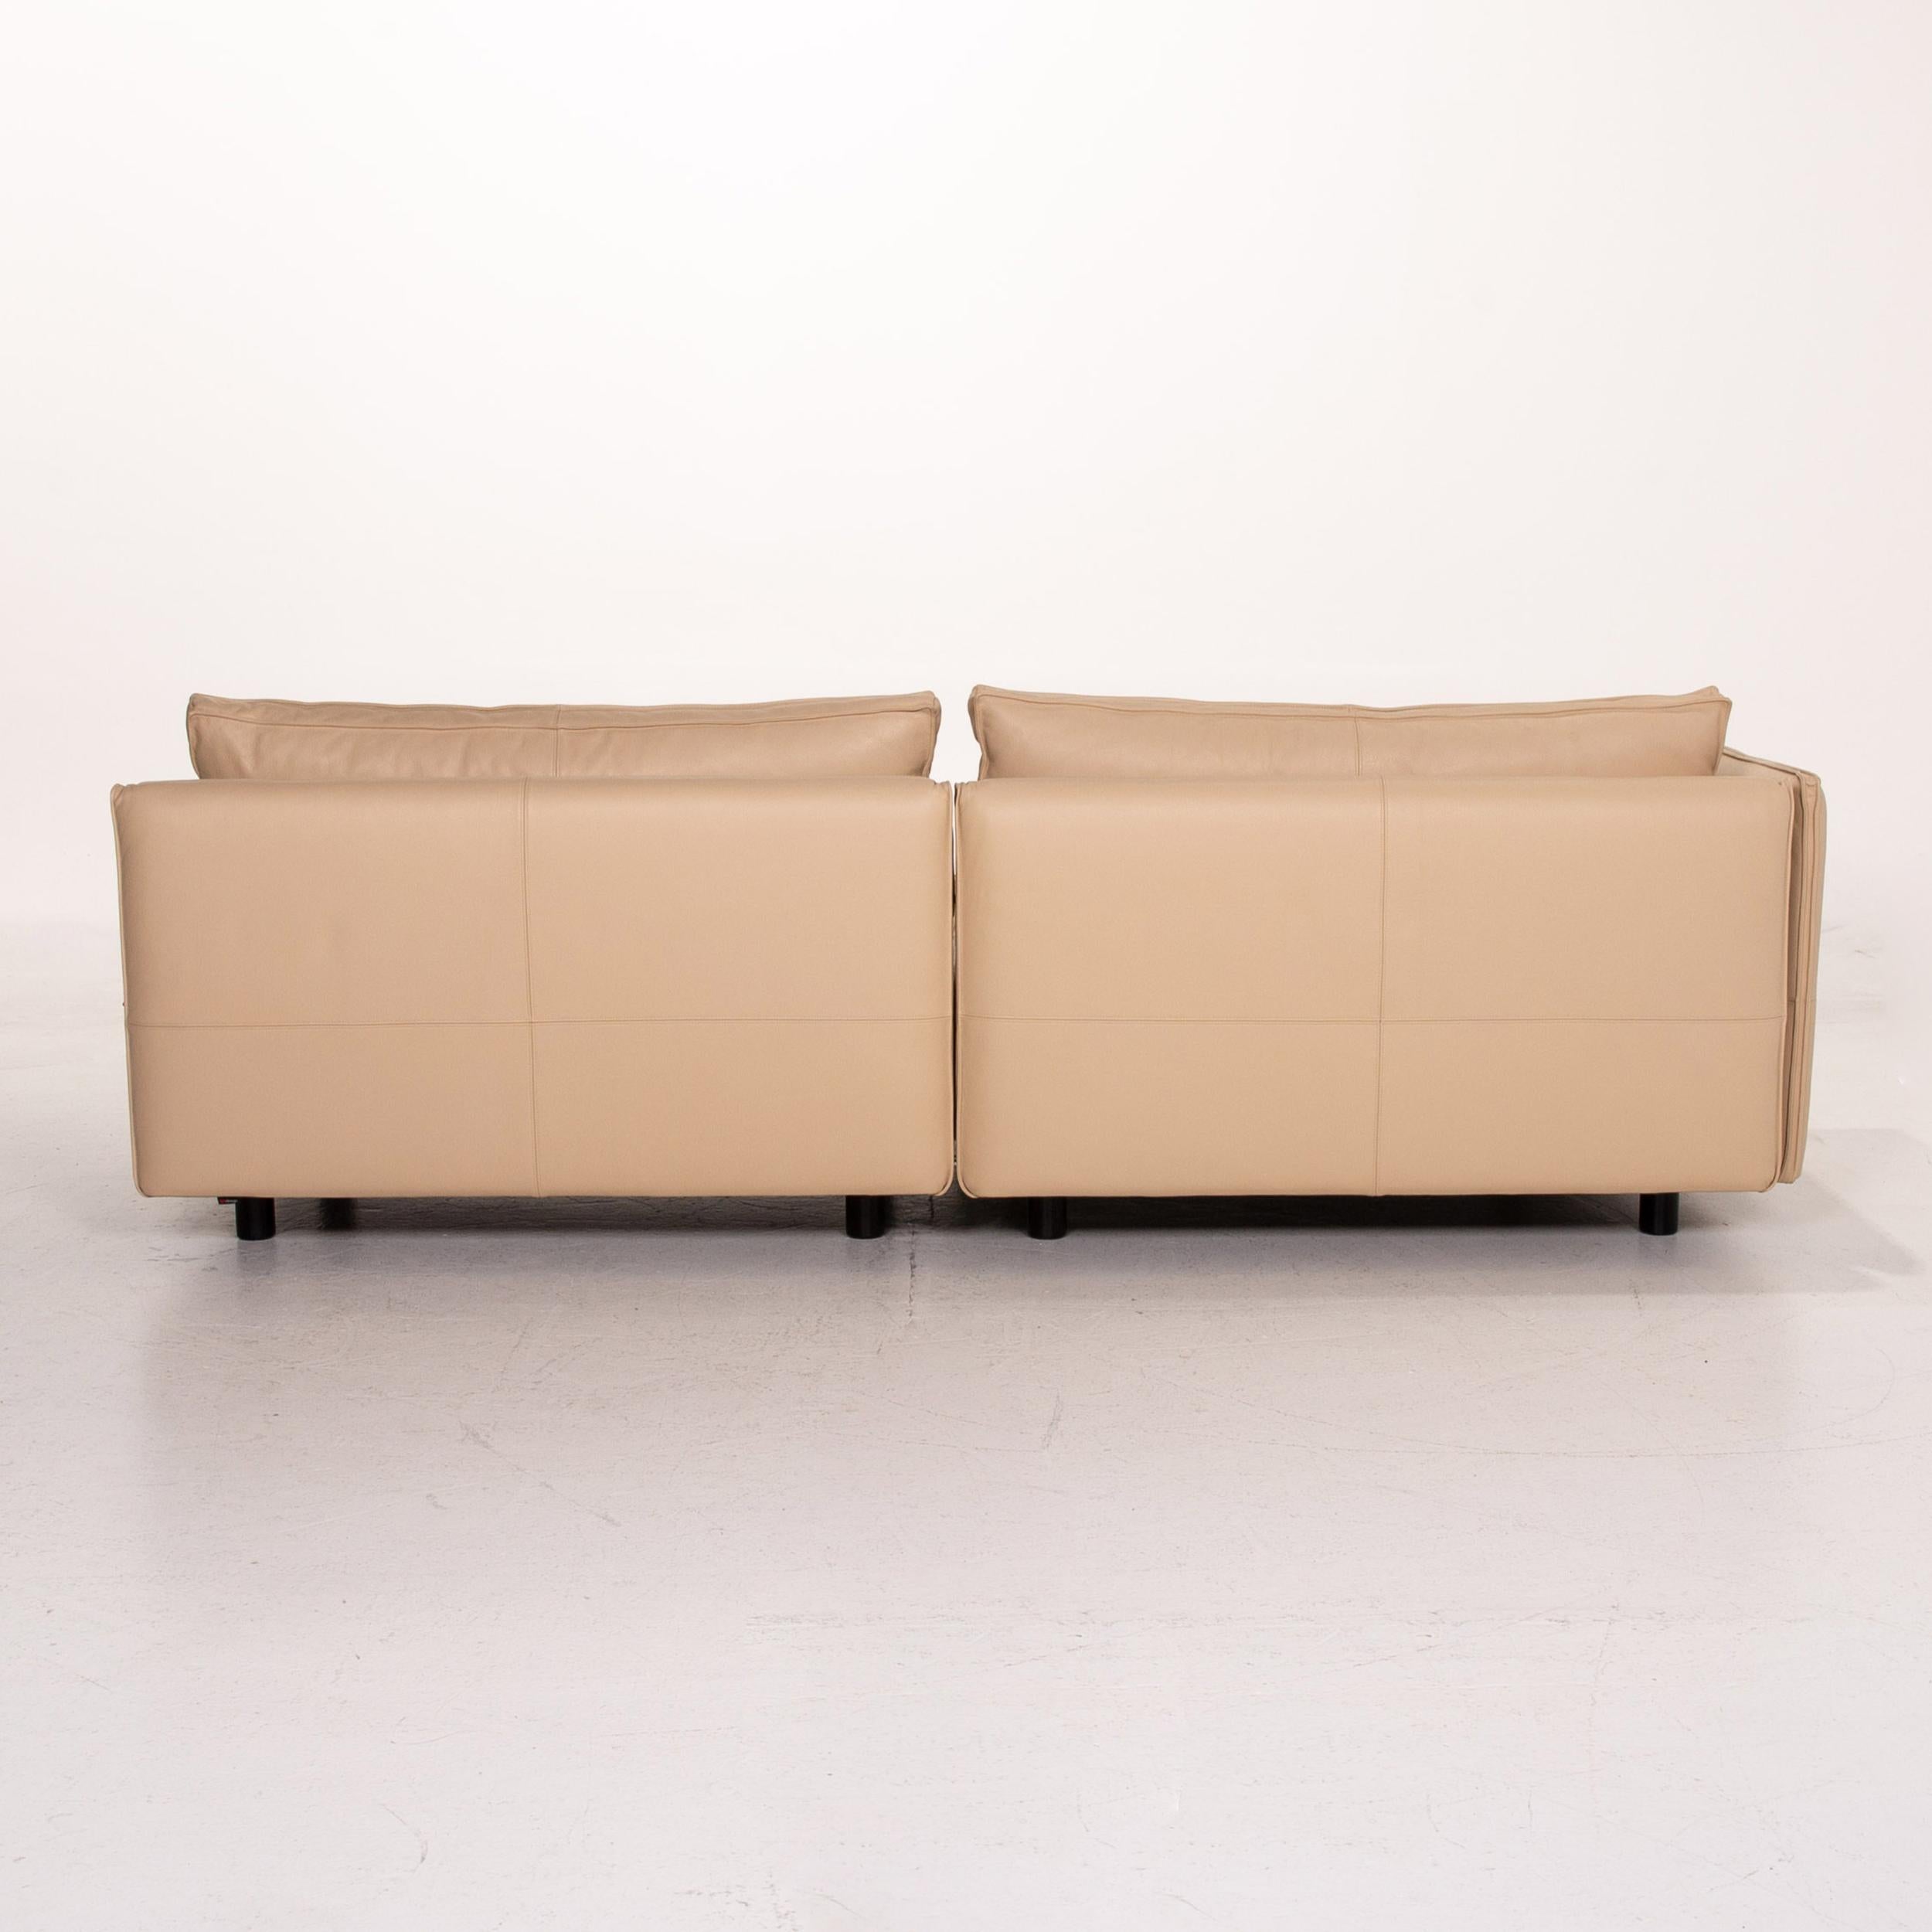 IP Design Cube Lounge Leather Corner Sofa Beige Sofa Couch For Sale 3